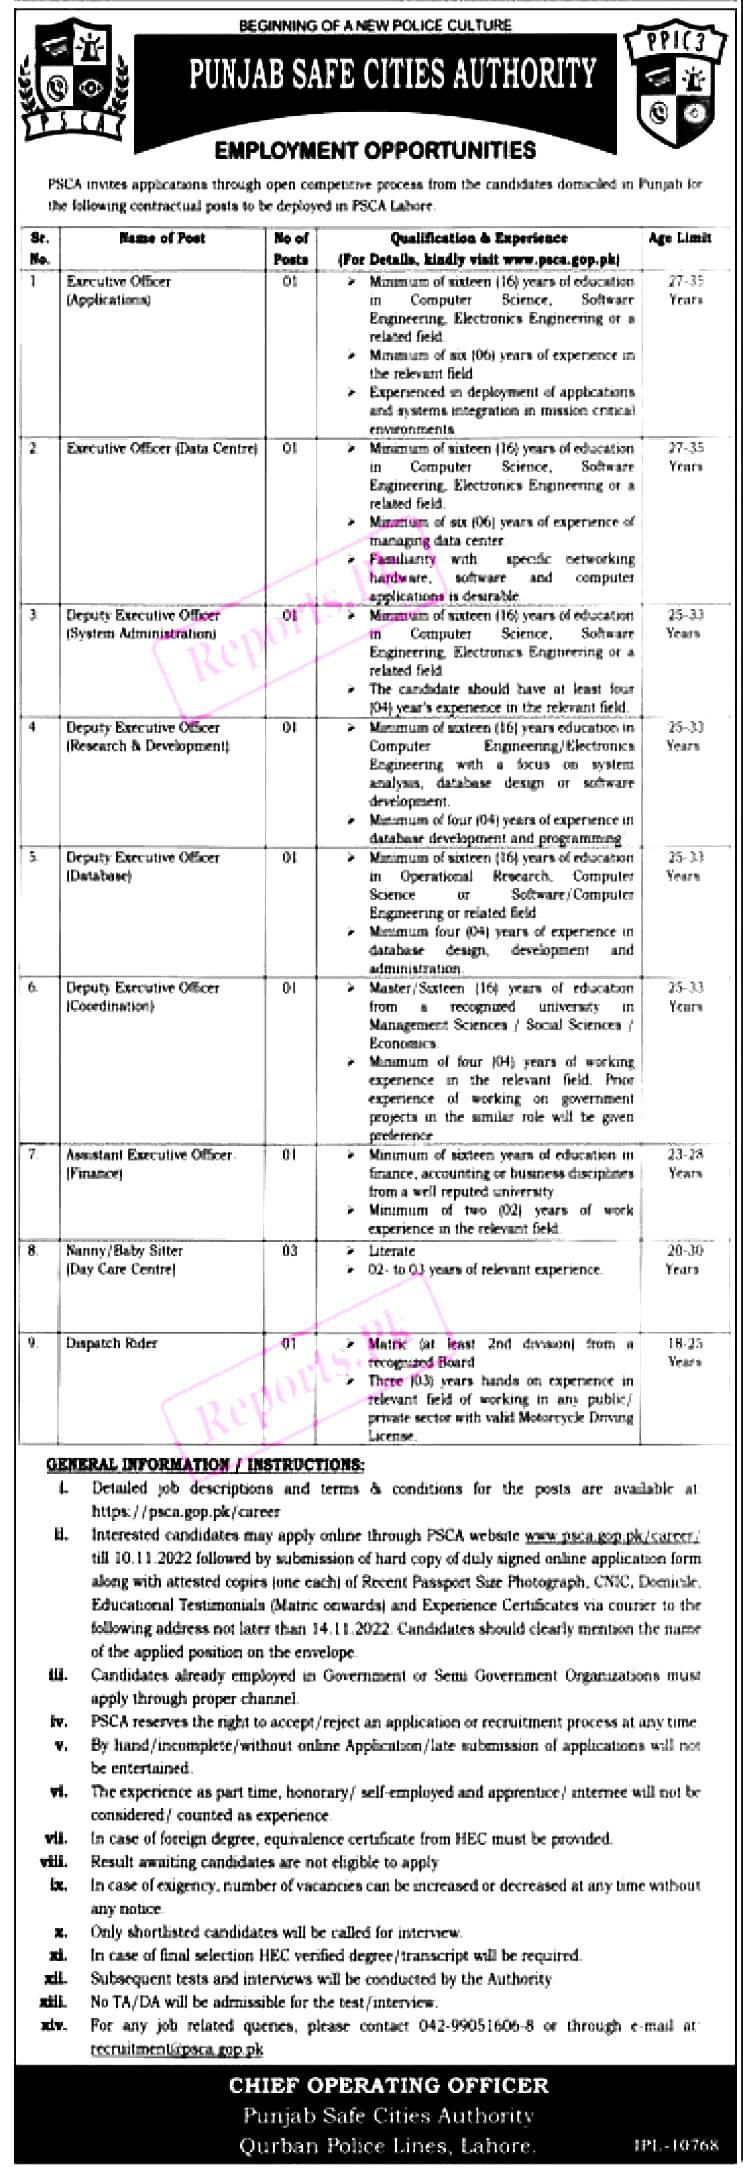 PSCA works of Punjab Safe Cities Authority 2022-PSCA Jobs 2022